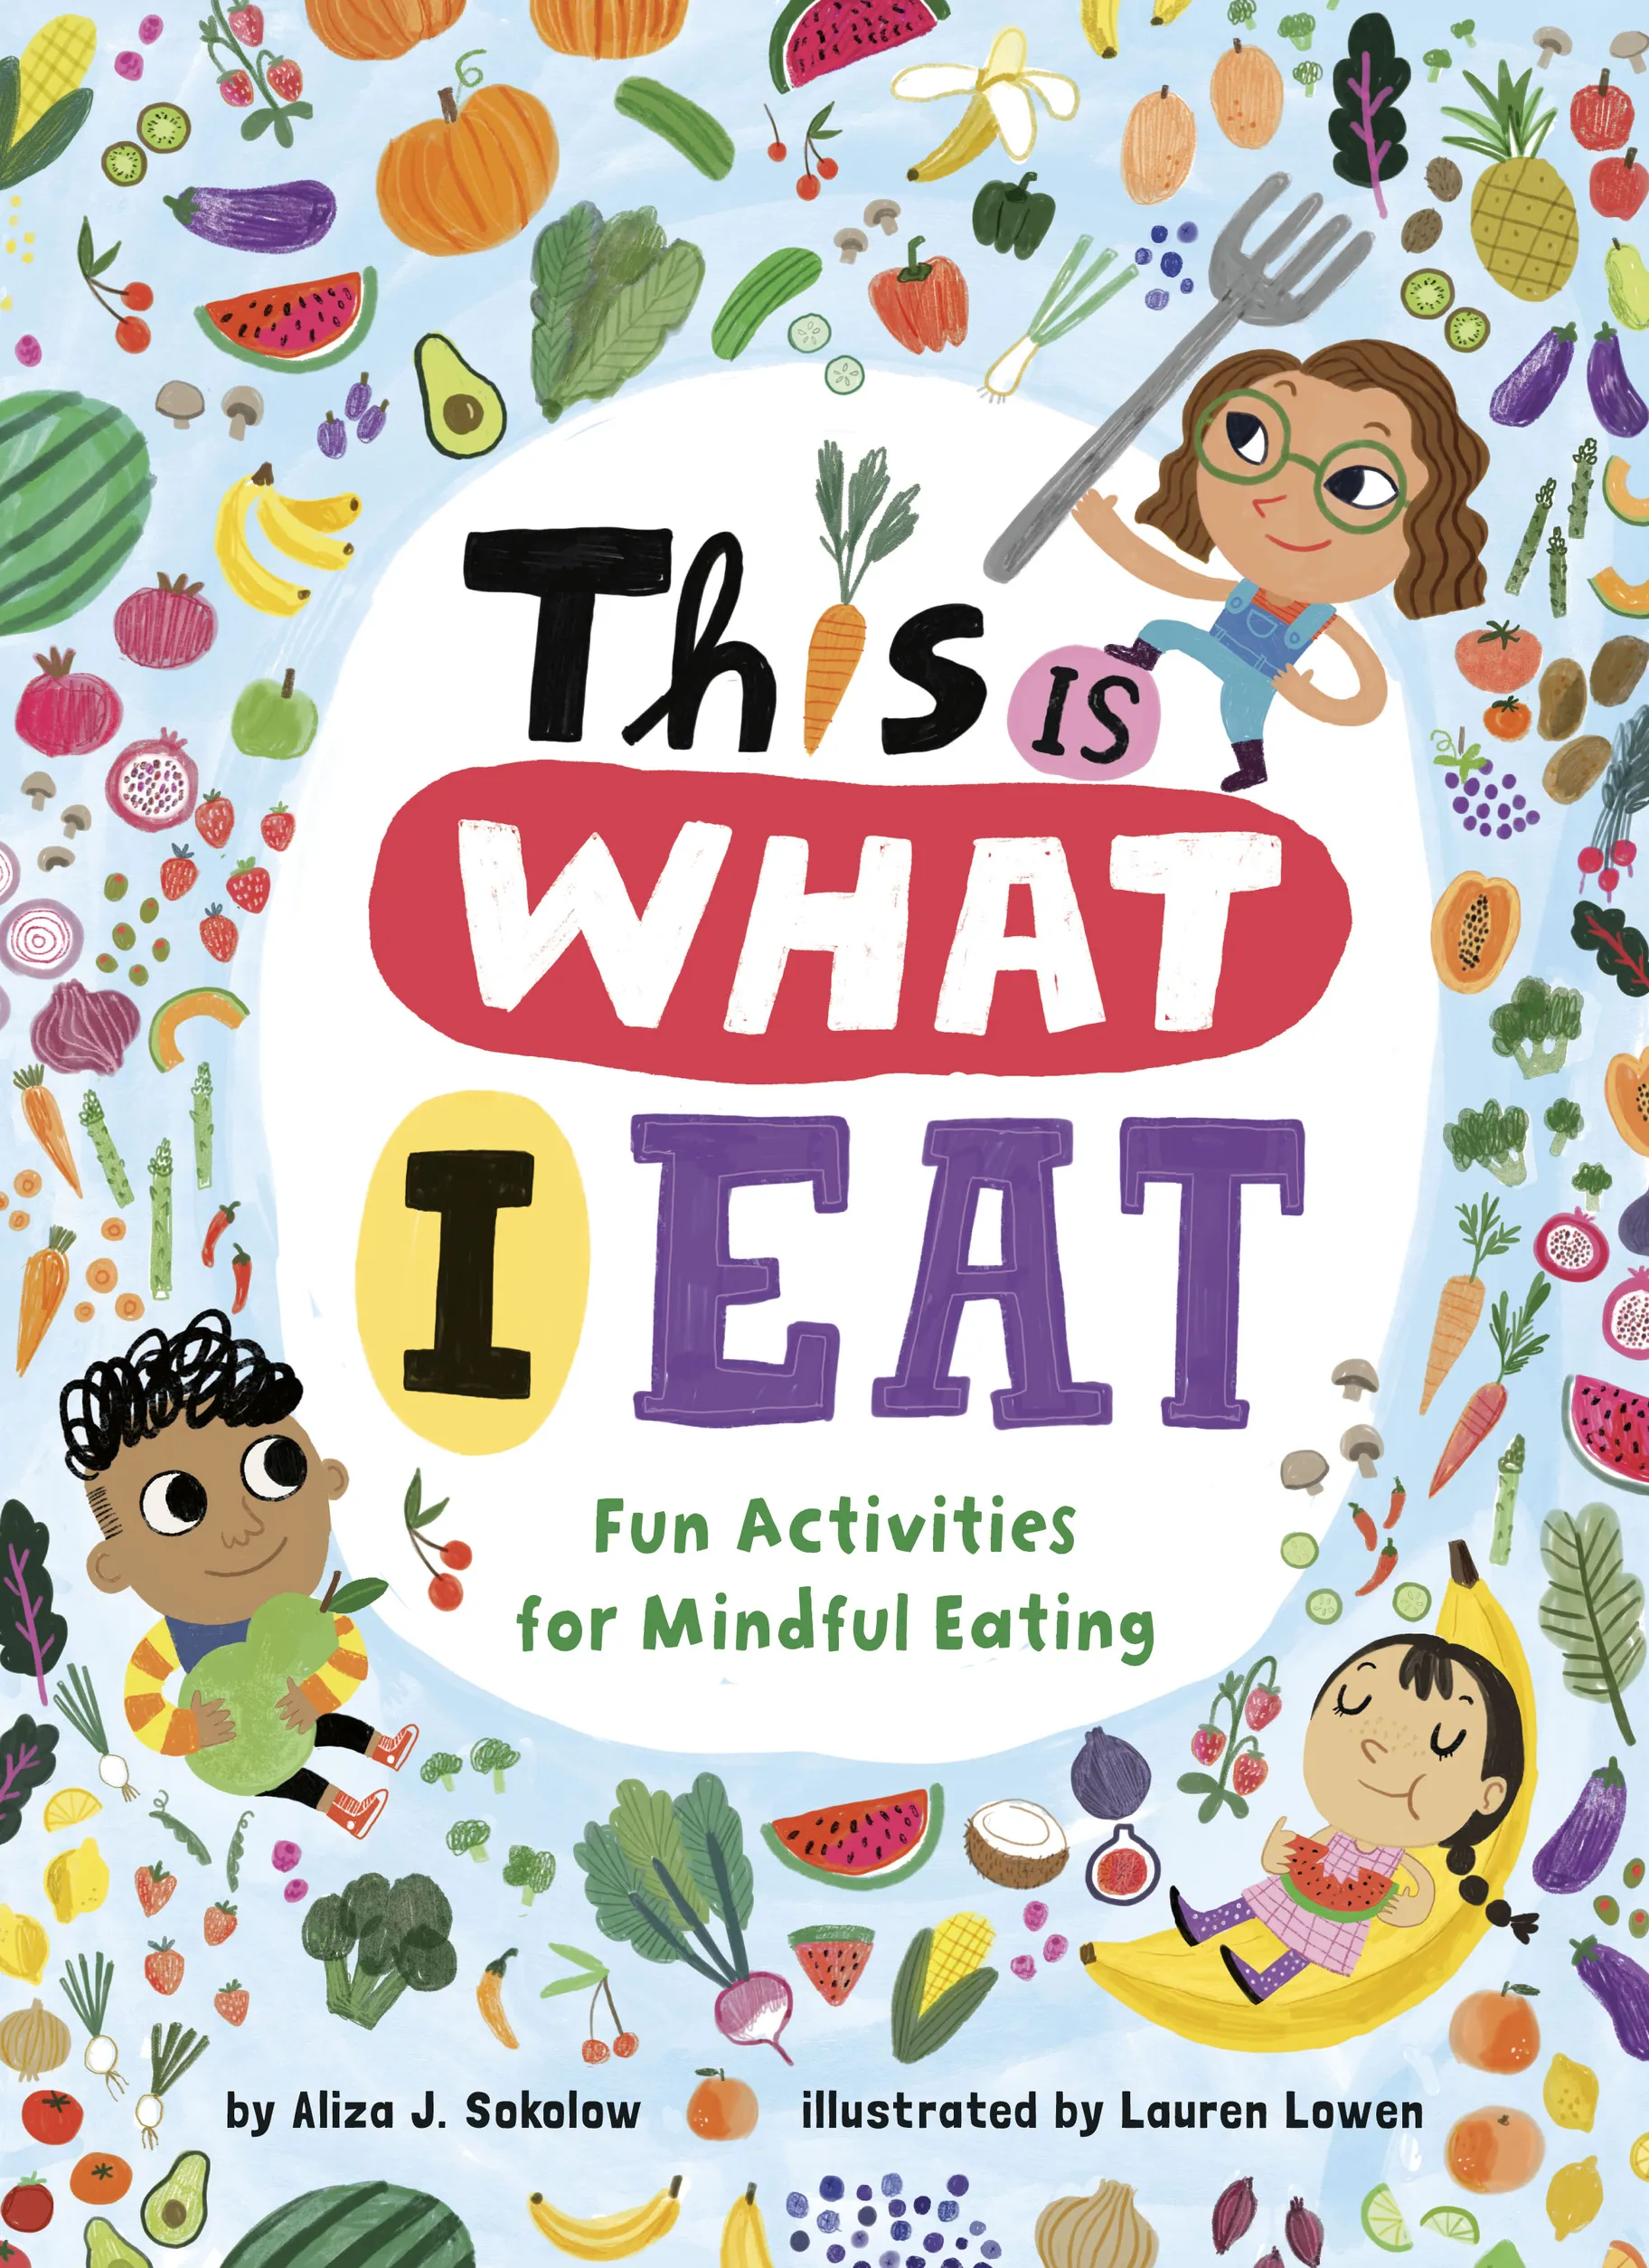 Red Light, Green Light, Eat Right: The Food Solution That Lets Kids Be Kids [Book]